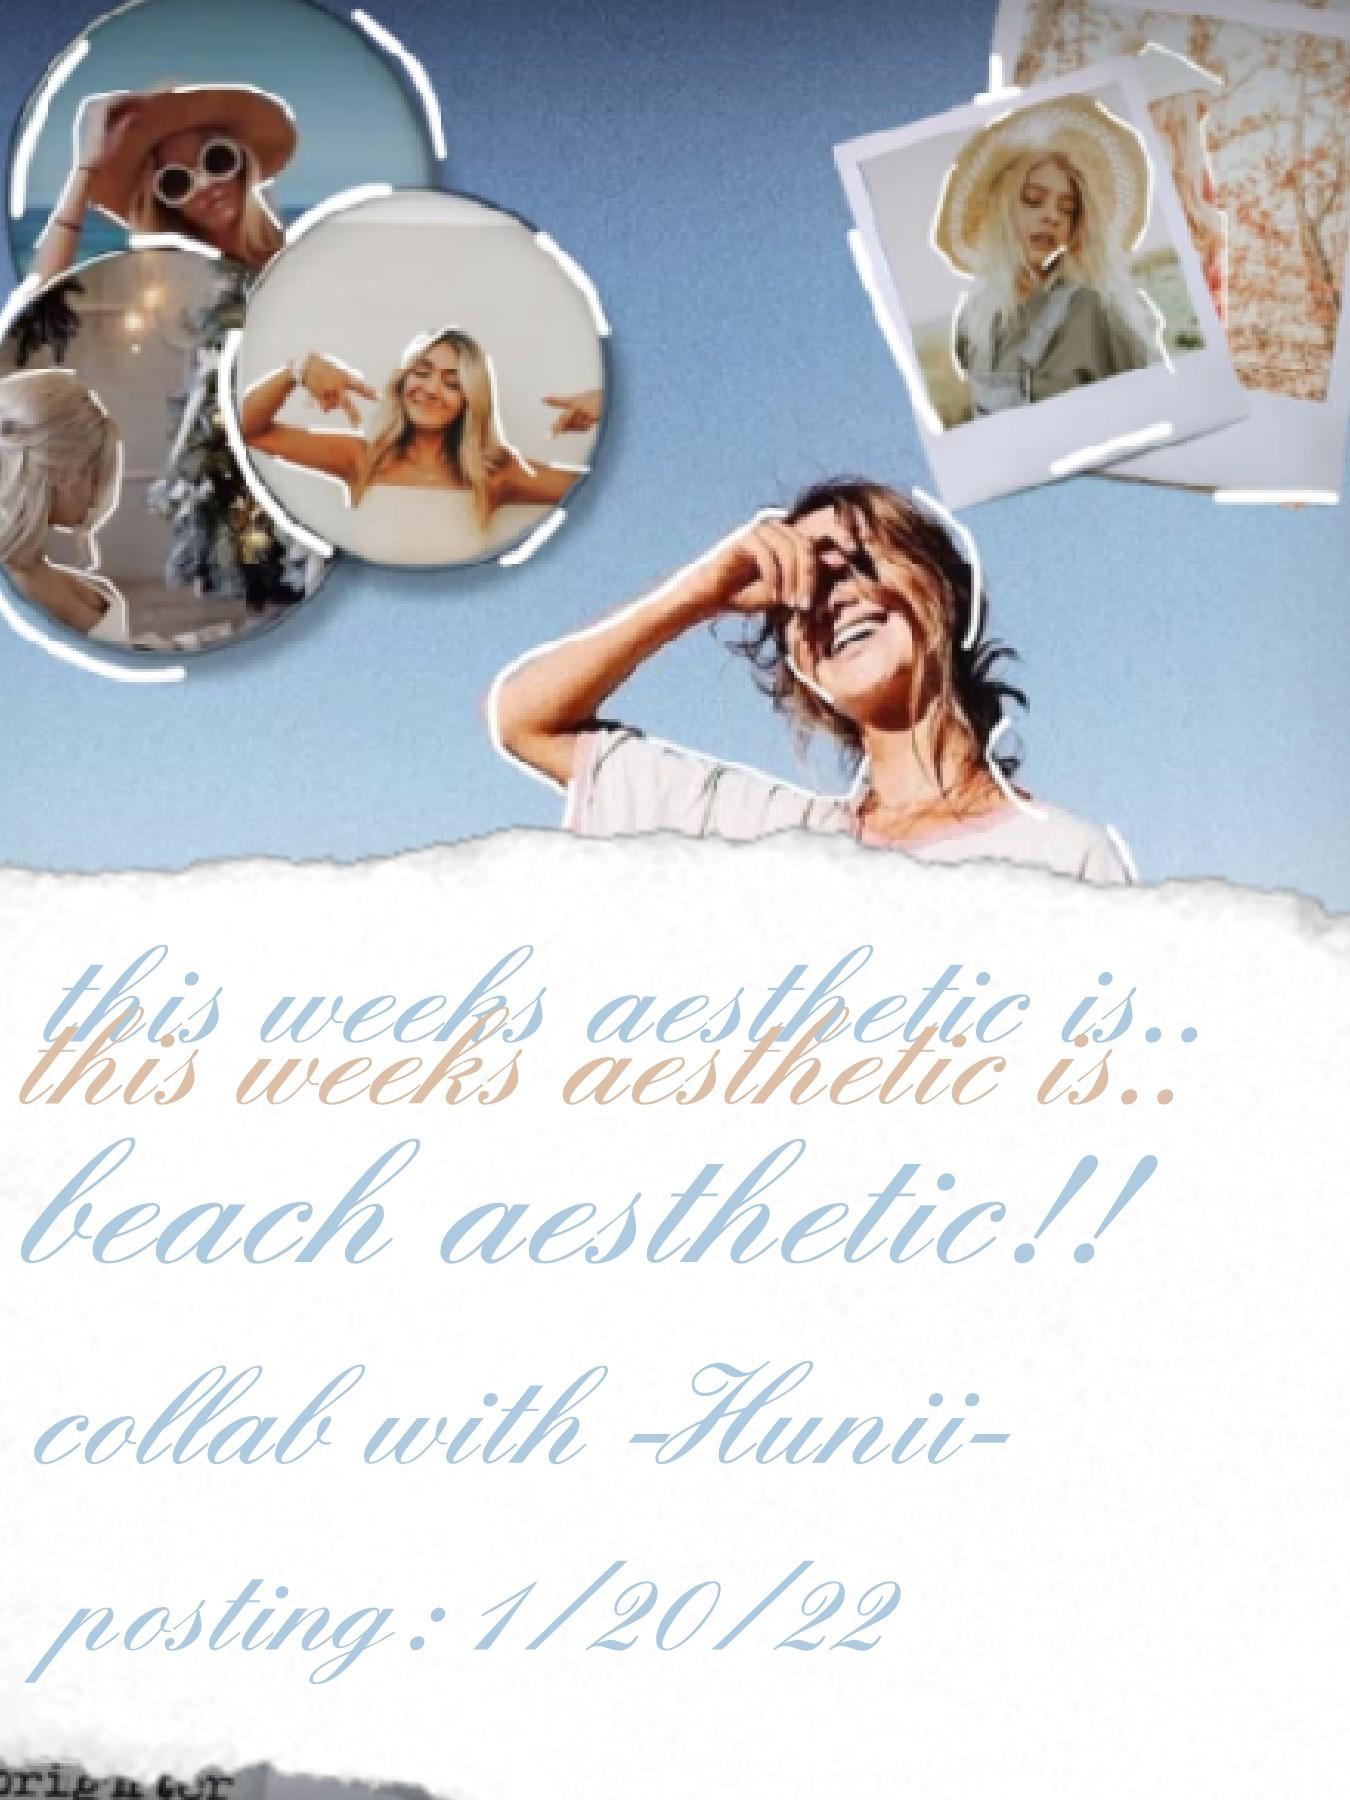 this weeks aesthetic is..
beach aesthetic!!a collab with one of my fav people -Hunii- ya'll she is soo sweet!! 🥰 also this collage is going to be posting 1/20/22 so keep an eye out for that!! also i hope ya'll join me in the aesthetic and I will add you t